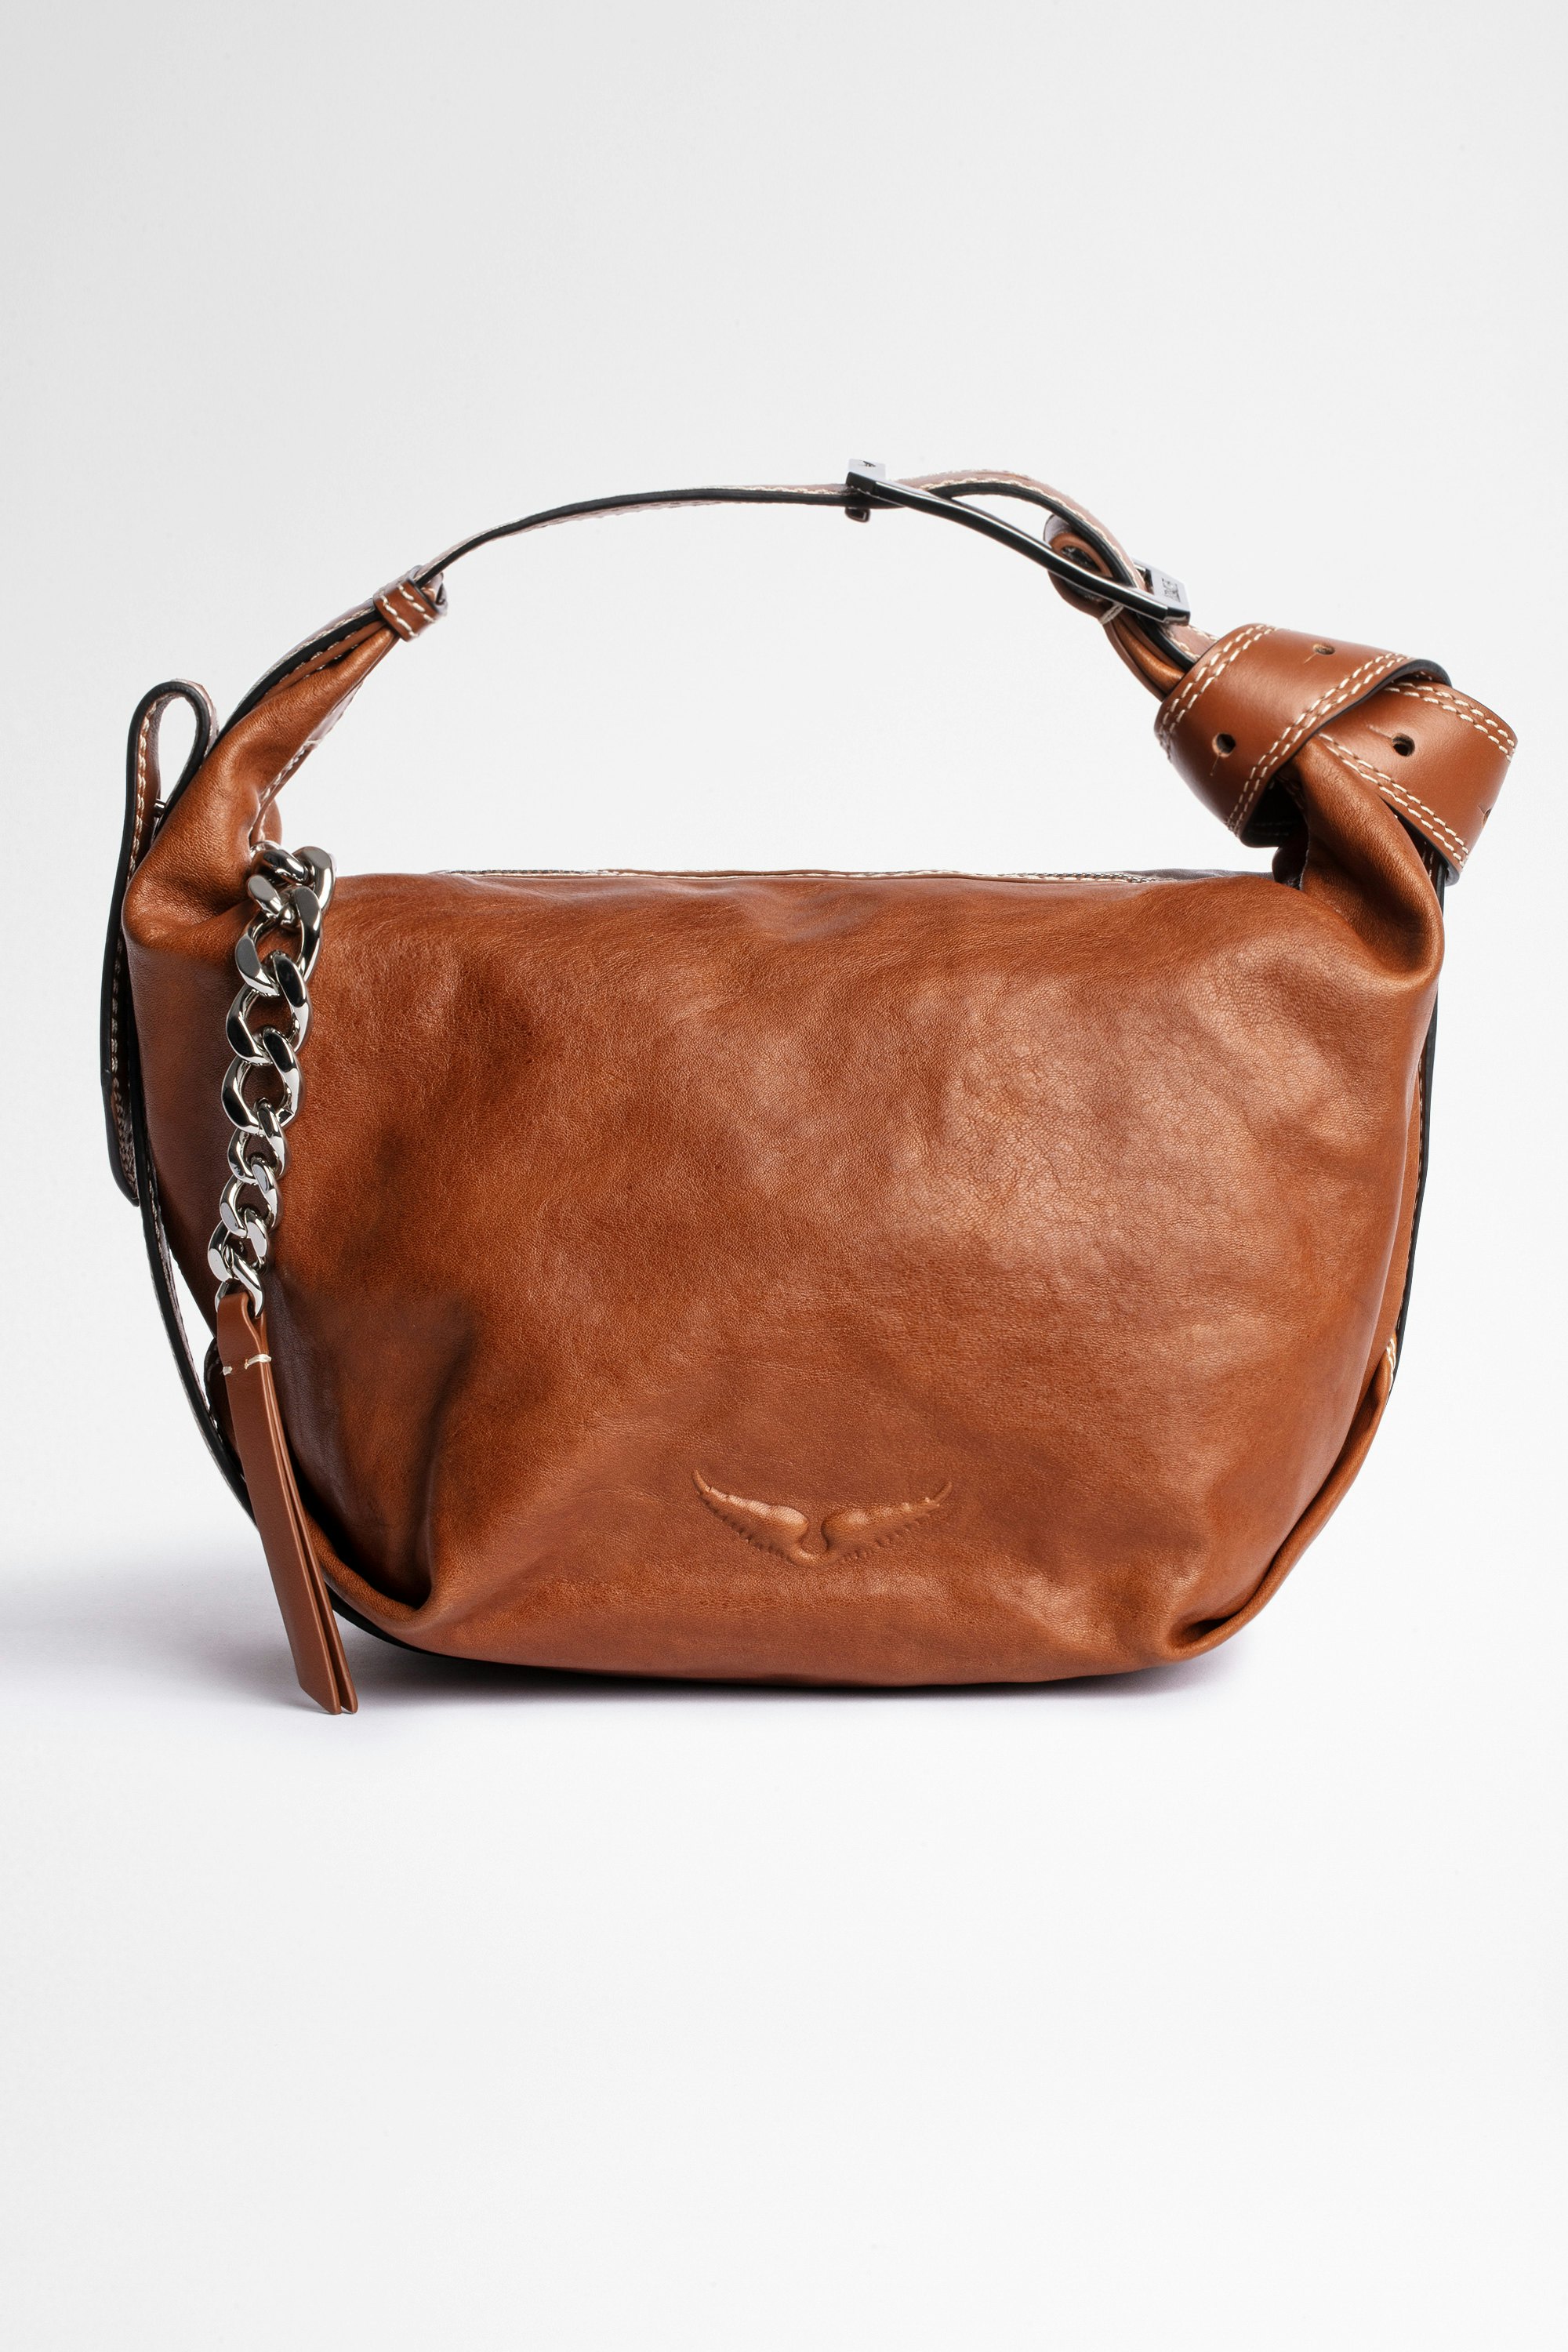 Le Cecilia バッグ Women's camel-colored leather shoulder or crossbody bag